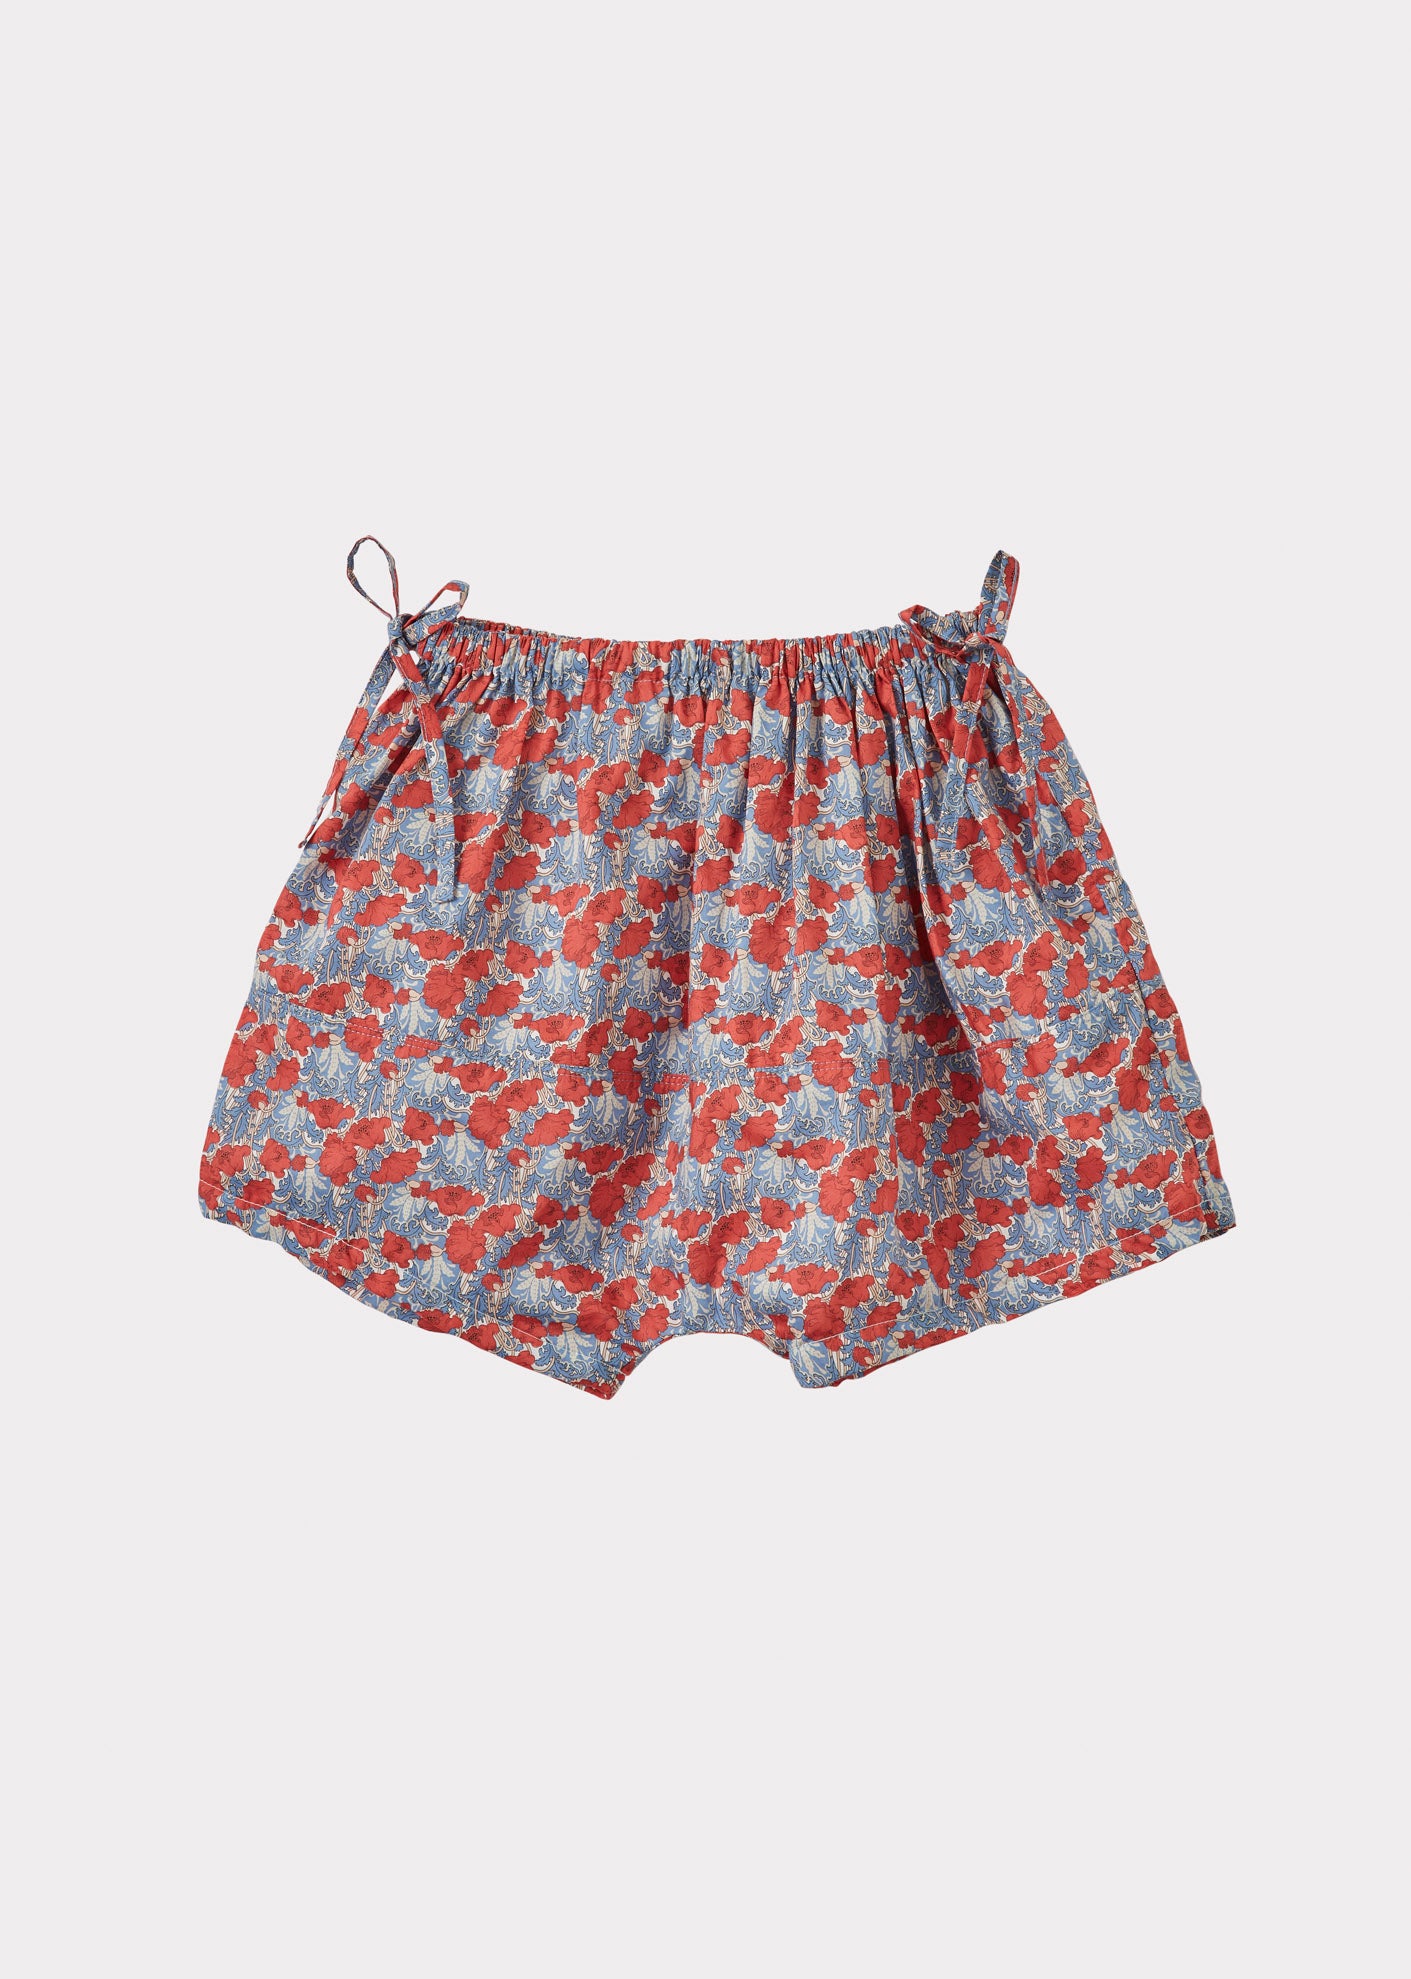 LOVAGE SHORTS - BLUE/RED